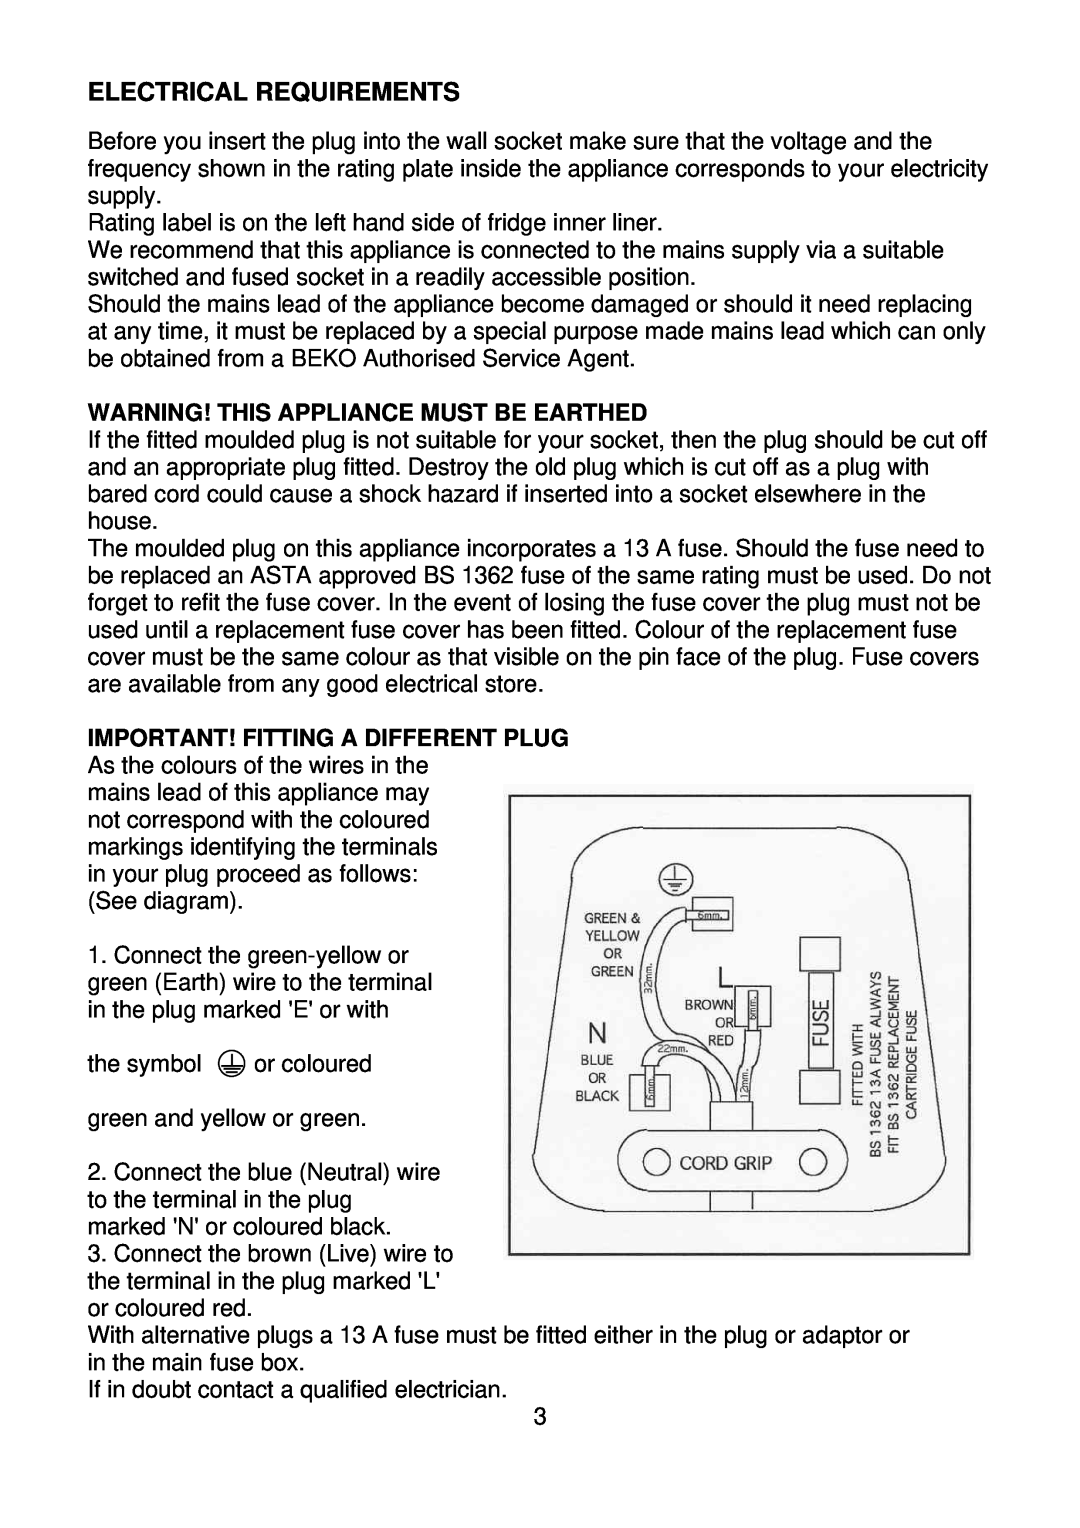 Beko CDA 540 manual Electrical Requirements, Warning! This Appliance Must Be Earthed, Important! Fitting A Different Plug 